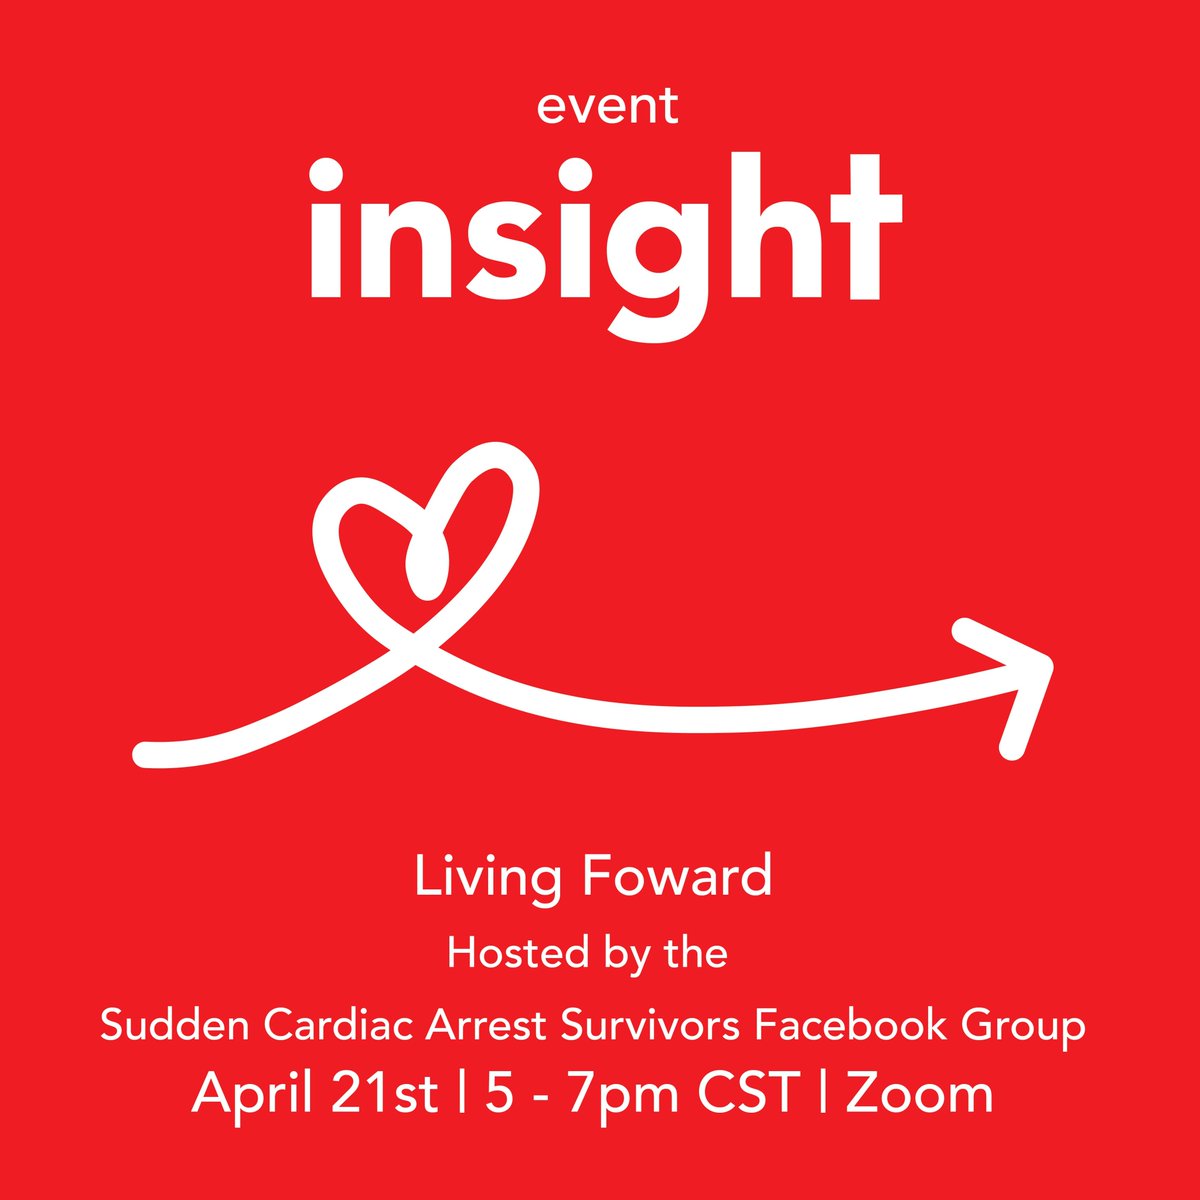 Heartsight is highlighting the Sudden Cardiac Arrest Survivors’ Facebook Group's monthly survivor support groups! 💕 This month's topic is 'Living Forward!' ➡️

#heartsight